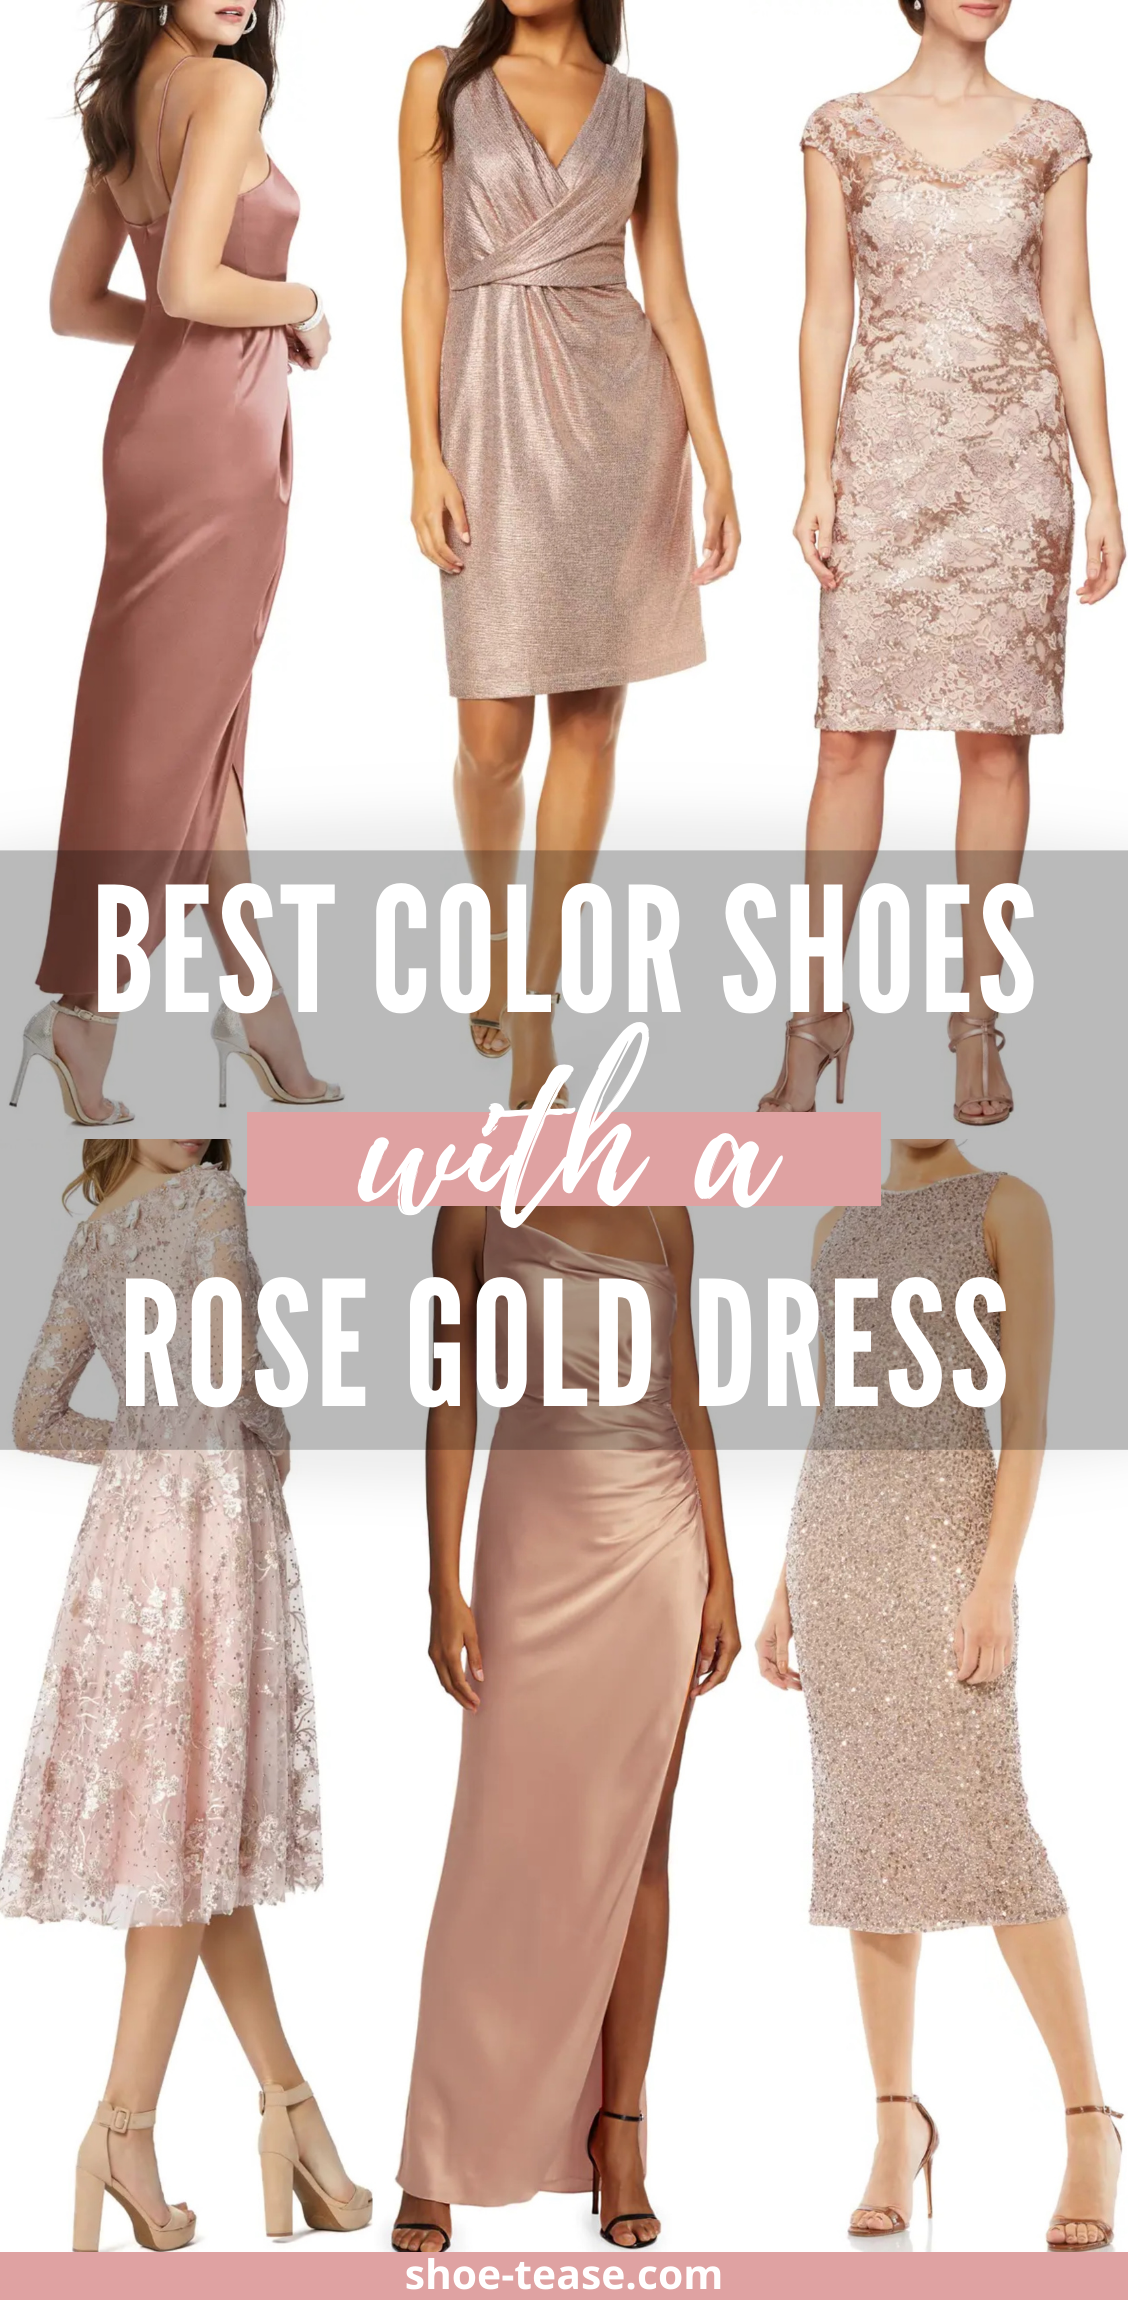 What color shoes to wear a with rose gold dress